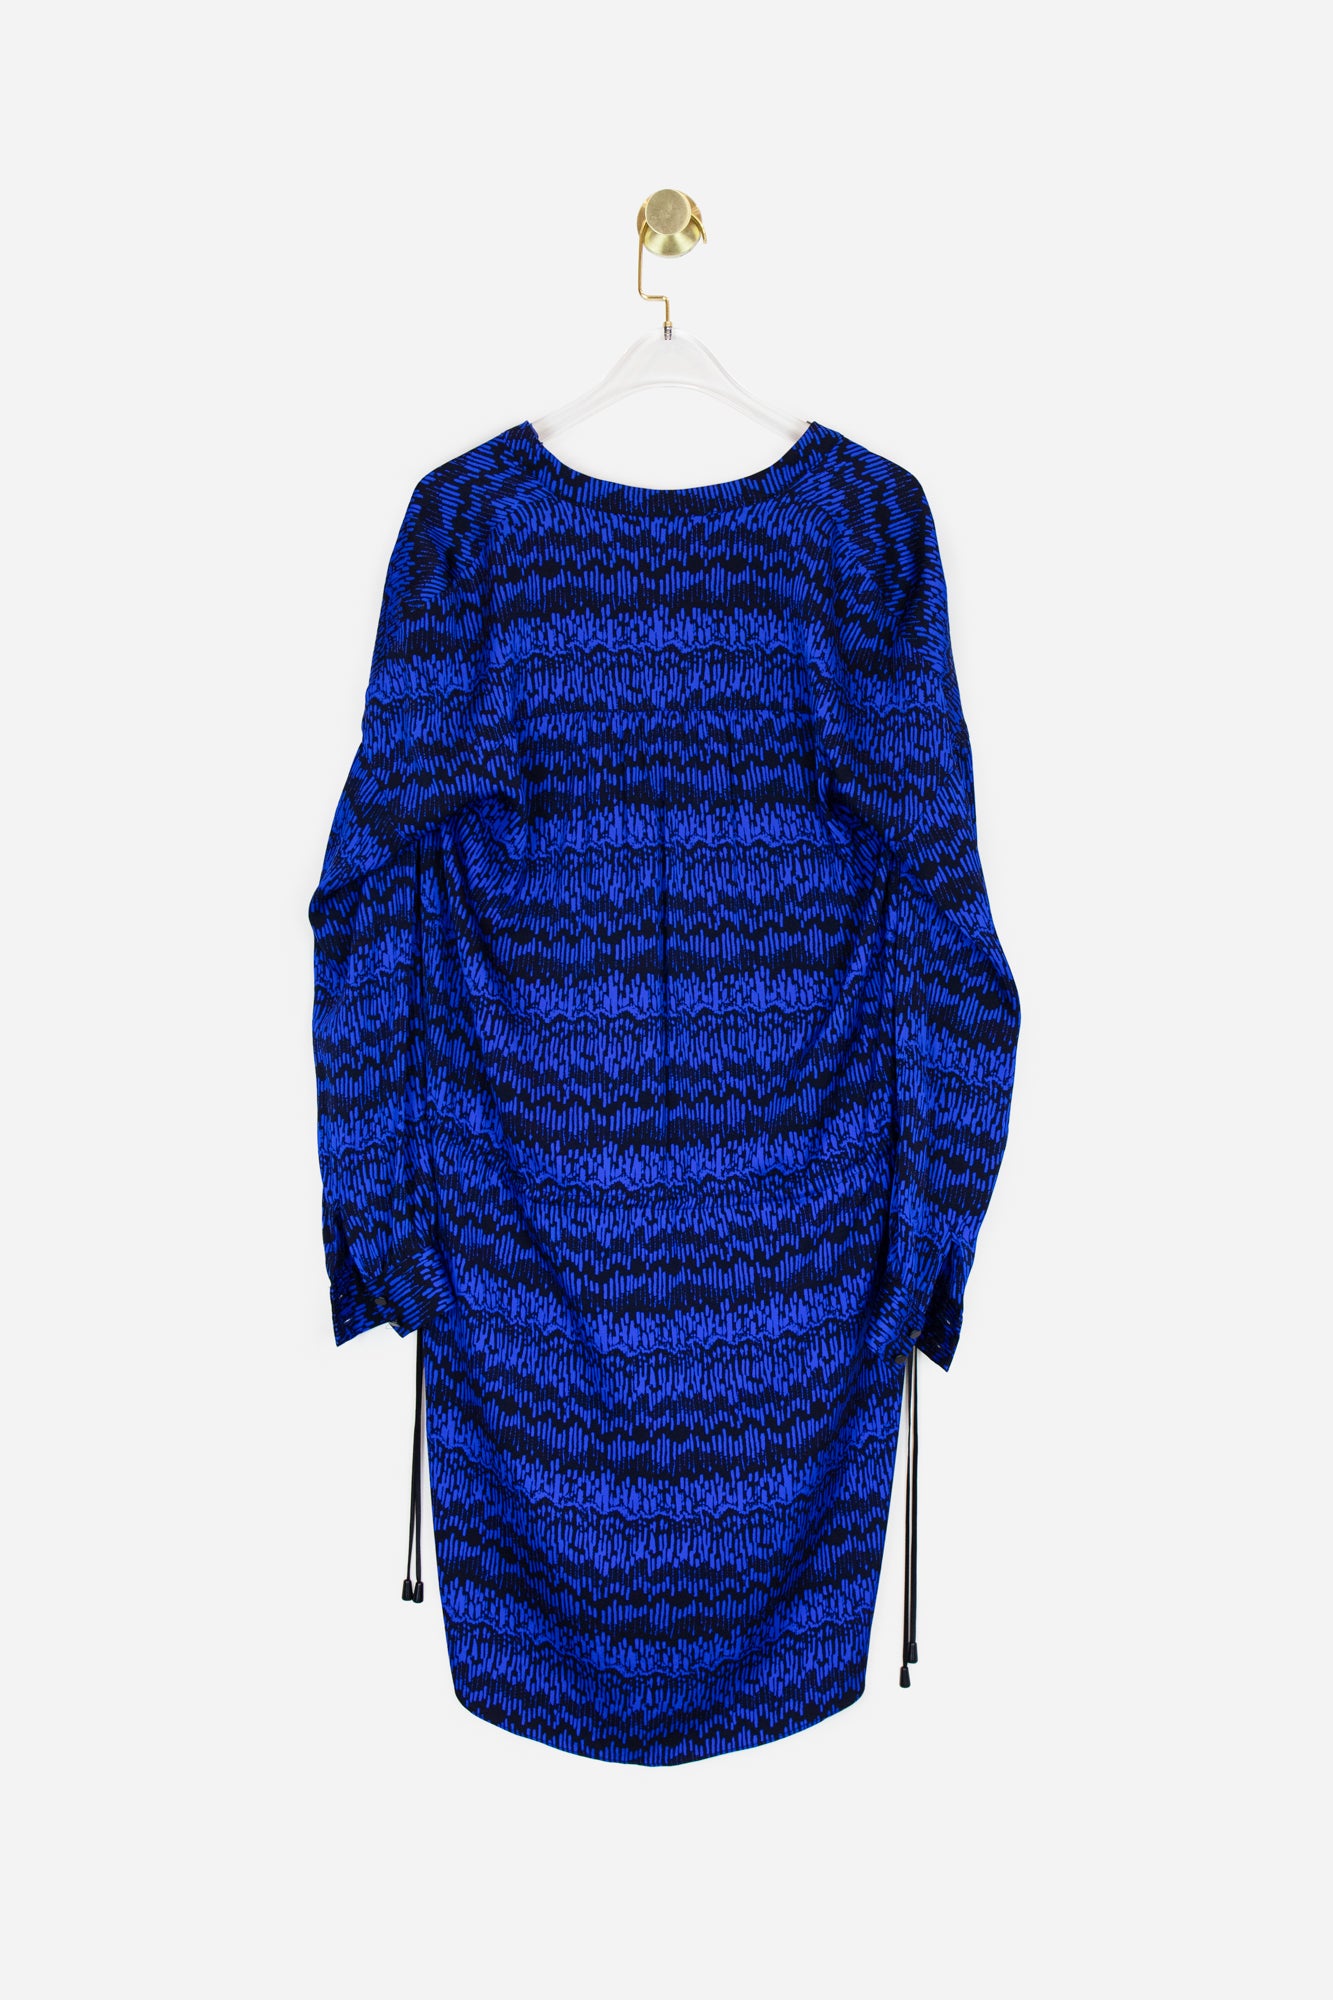 Blue and Black Print Belted Dress - So Over It Luxury Consignment